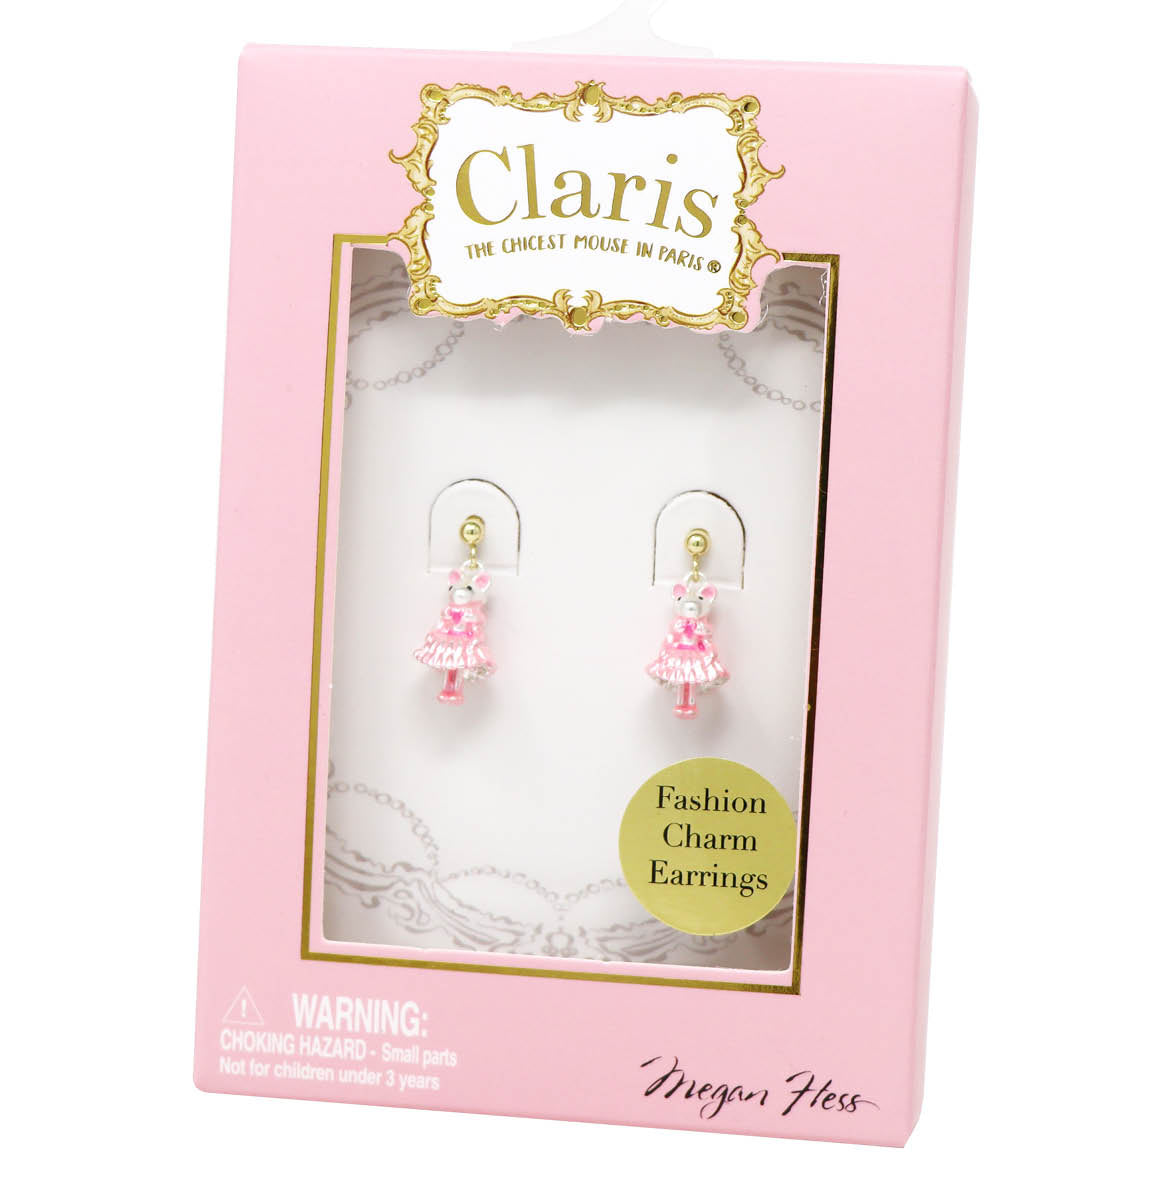 Claris the mouse from Paris earrings